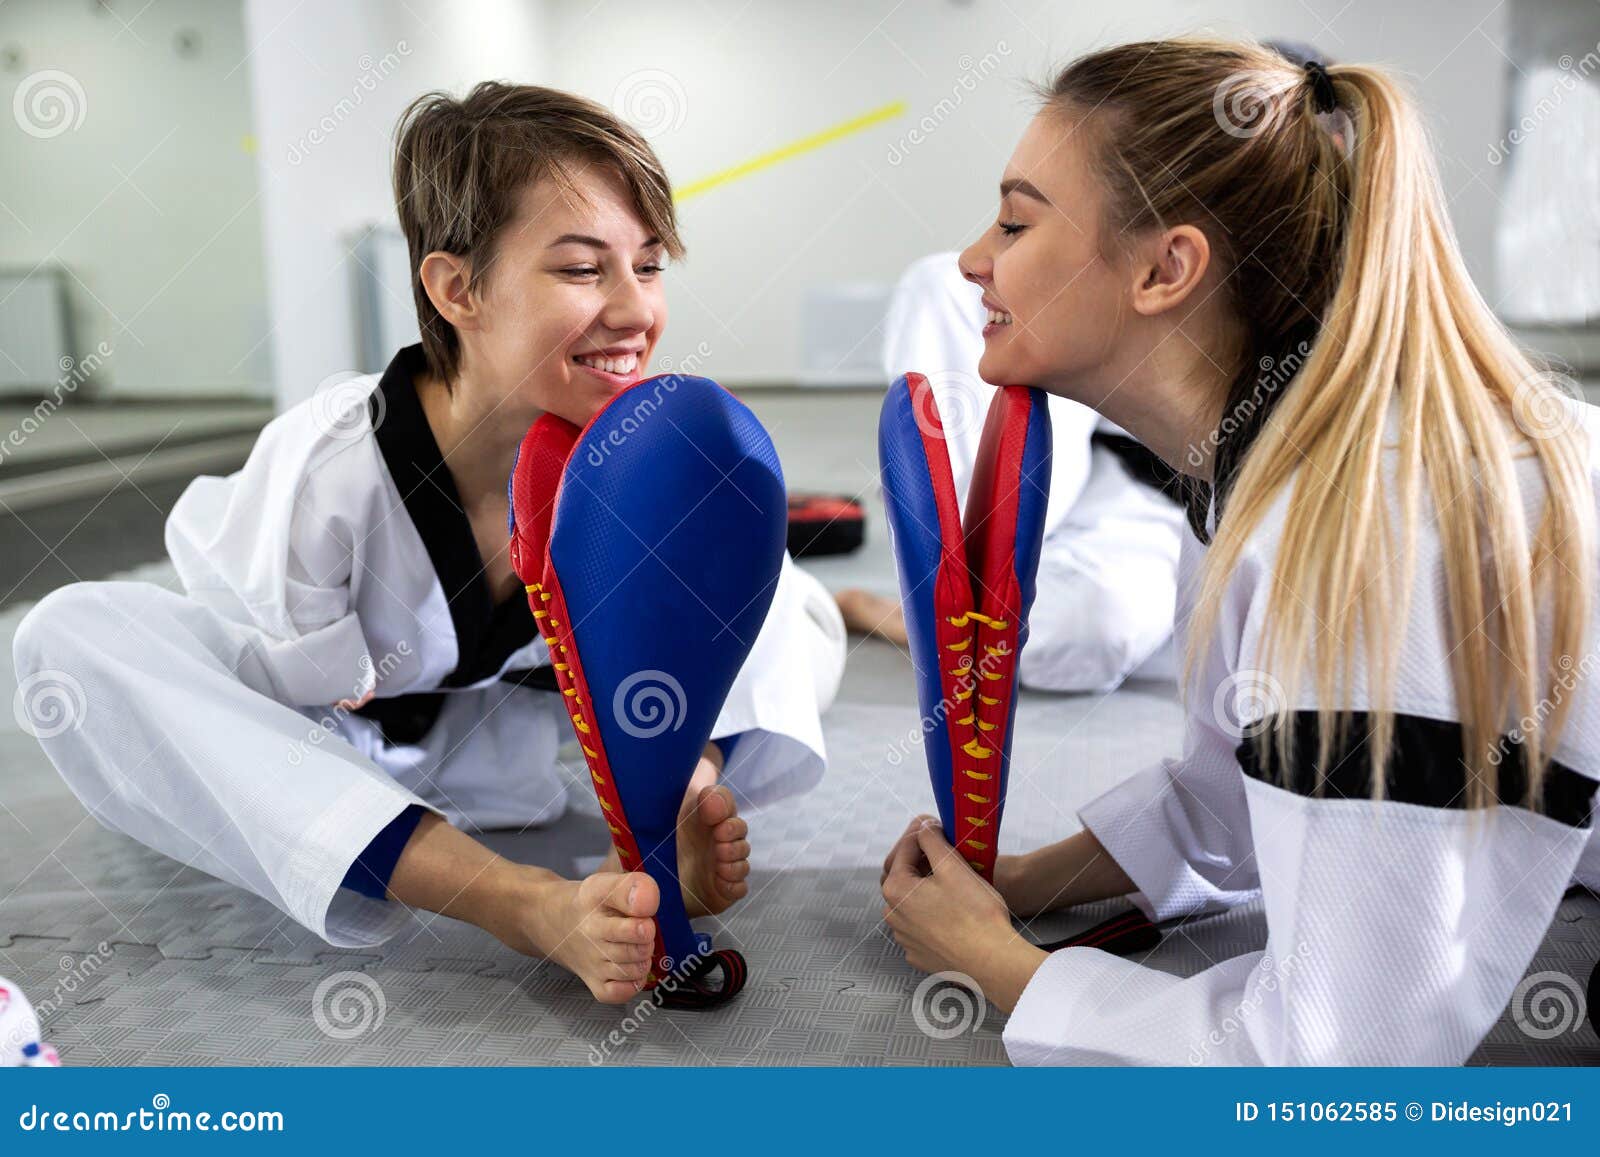 physically disabled martial art combat fighter and her friend holding a kick pad target